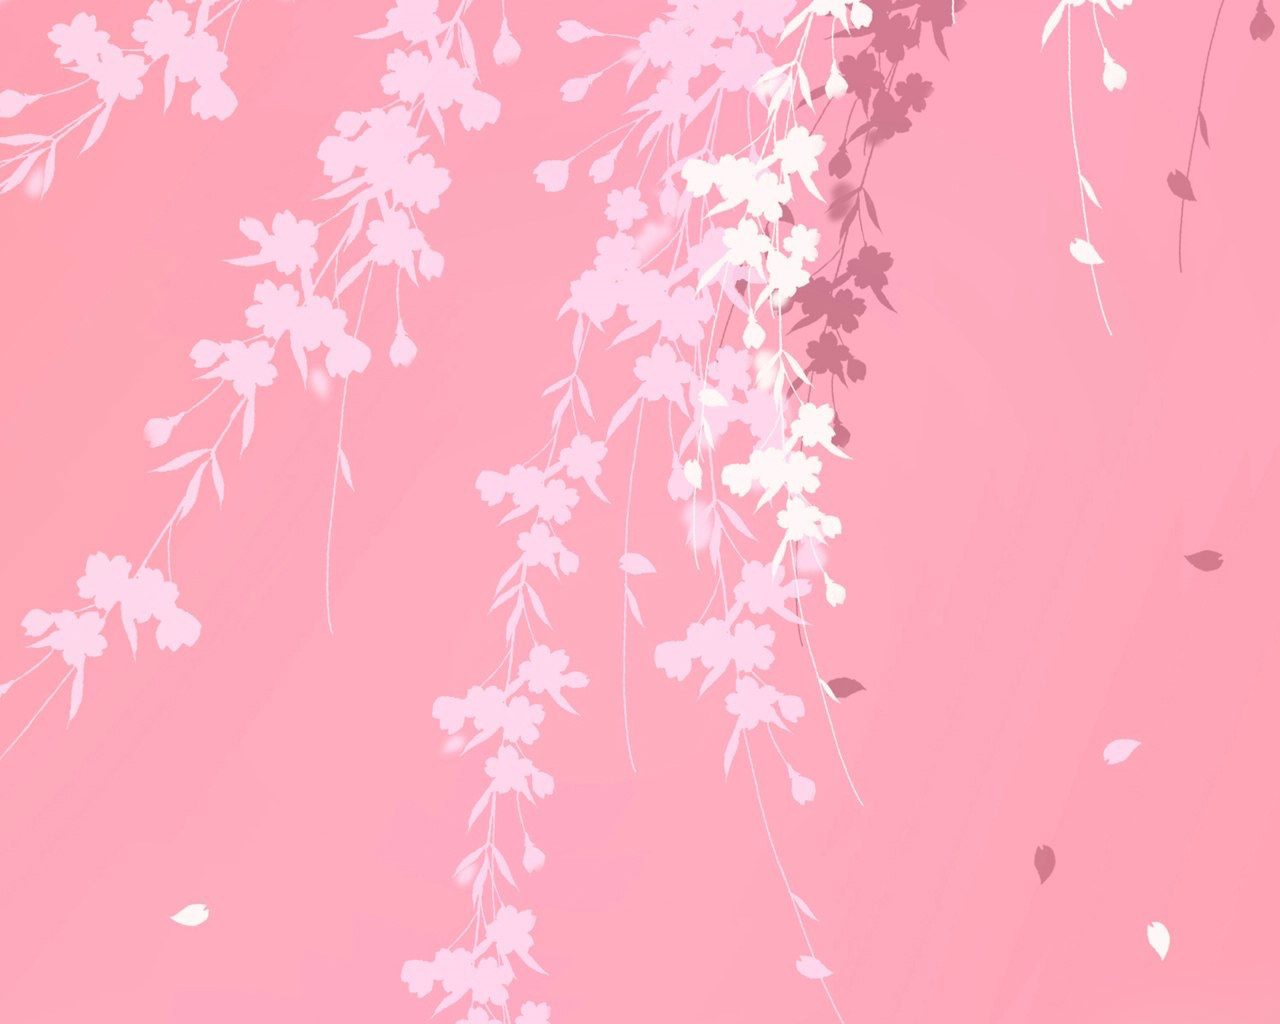 Download Pink background branches windows 7 hd Wallpaper in high